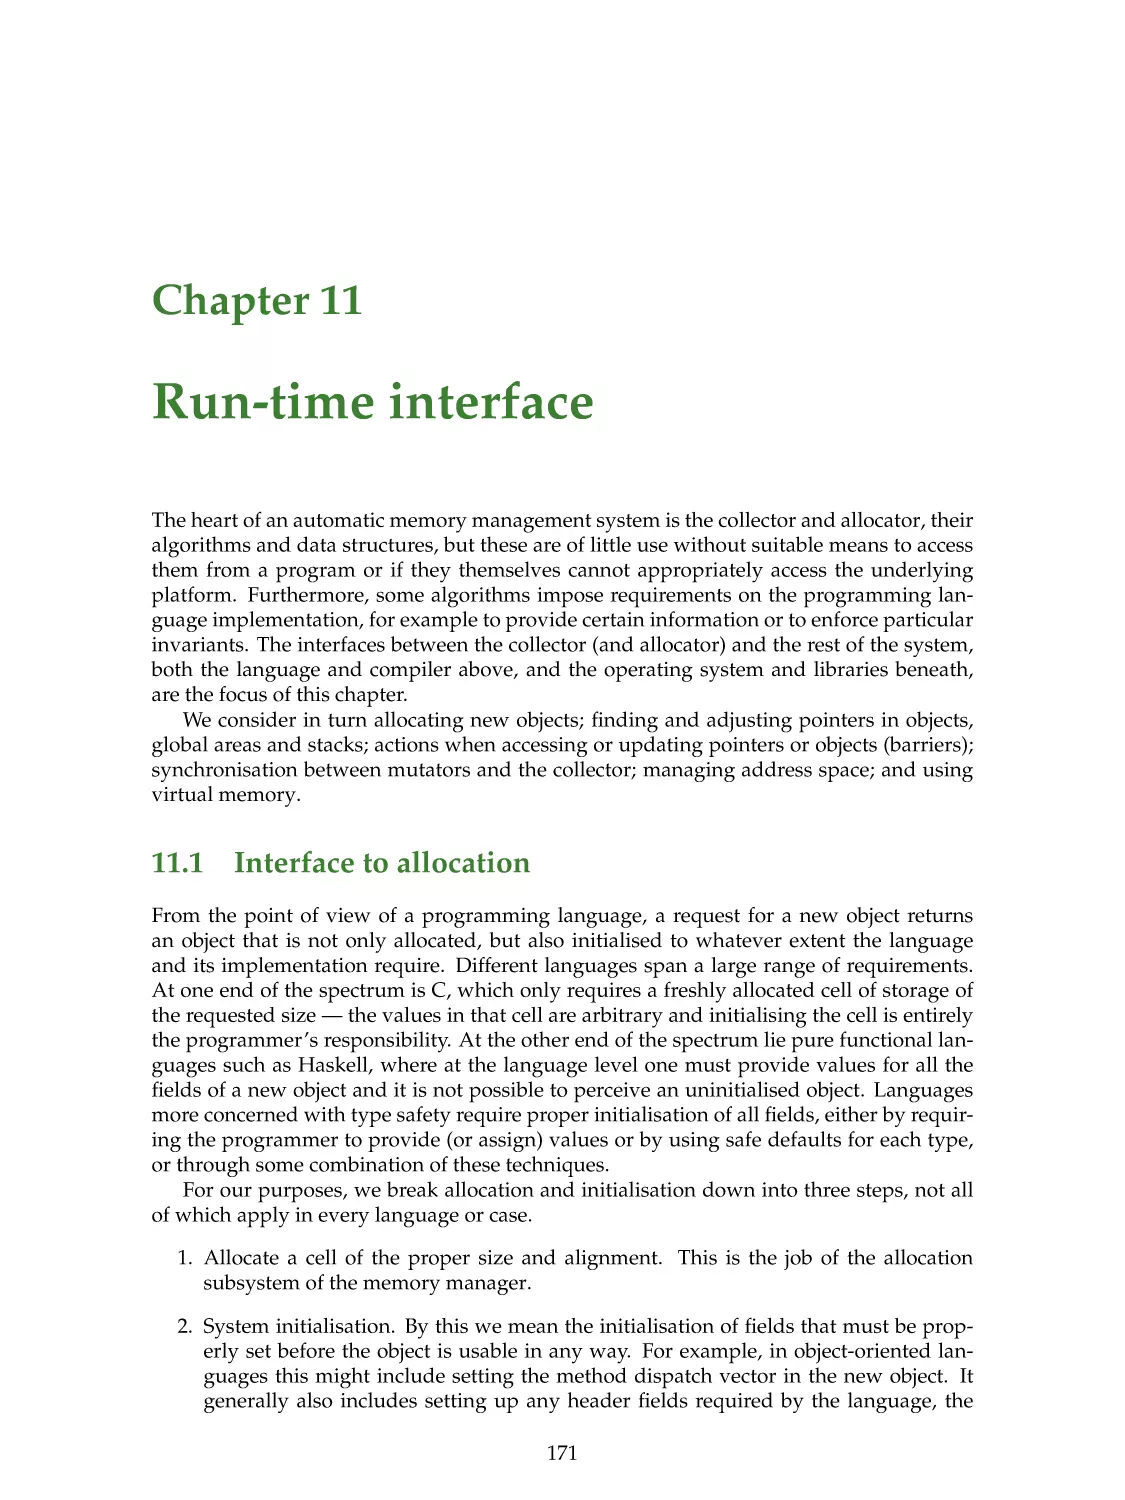 11. Run-time interface
11.1. Interface to allocation